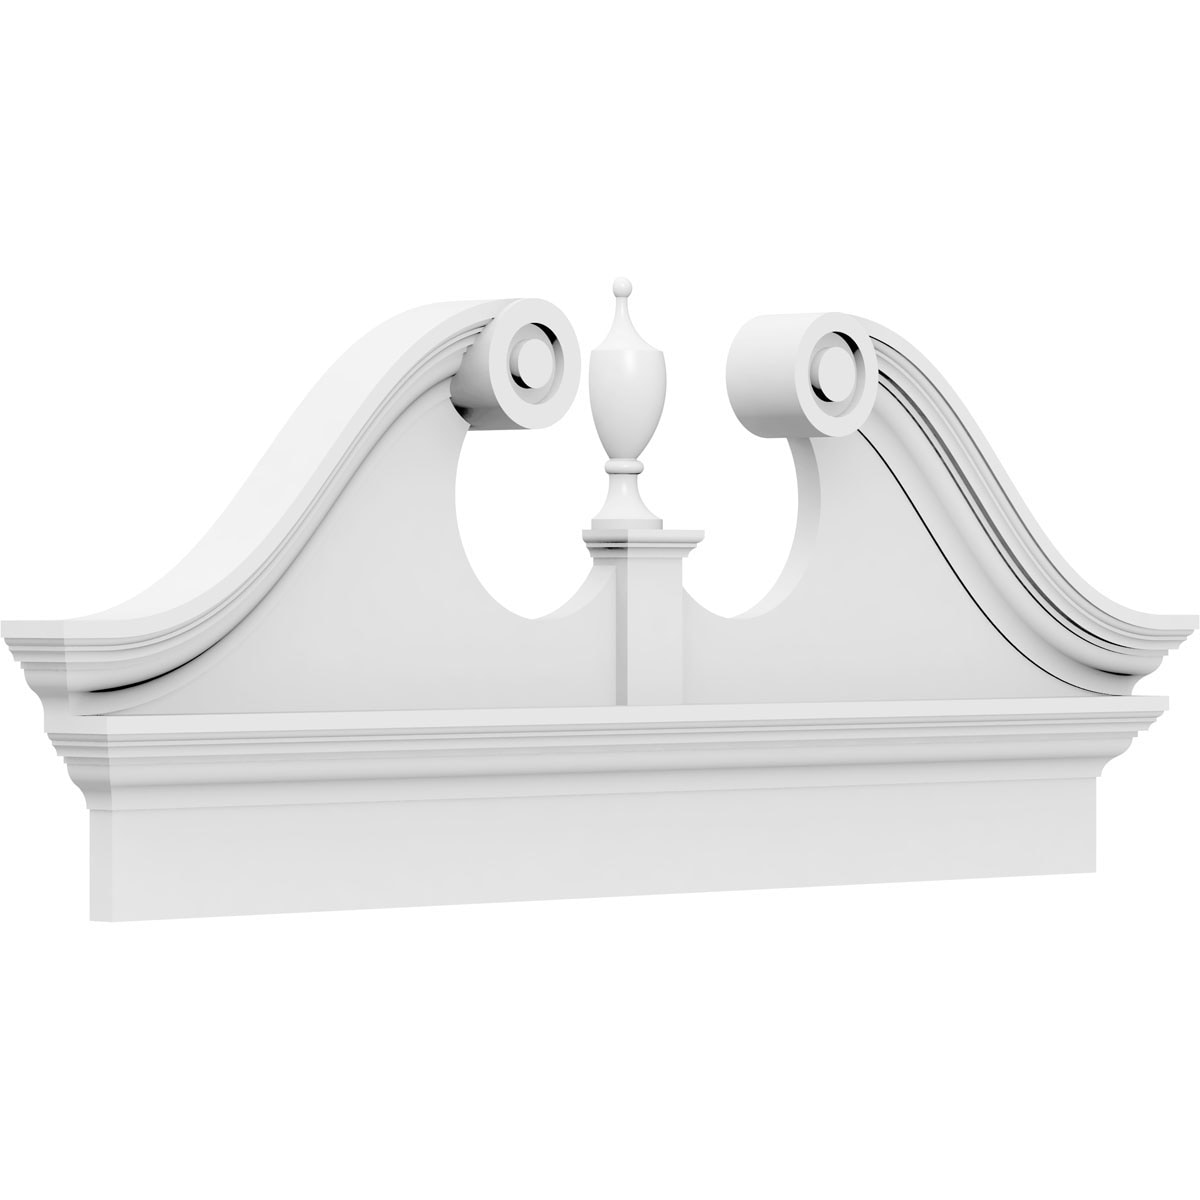 Ekena Millwork Rams Head 50-in x 19-3/8-in Unfinished PVC Pediment Entry Door Casing Accent in White | PEDPC050X195RHP00